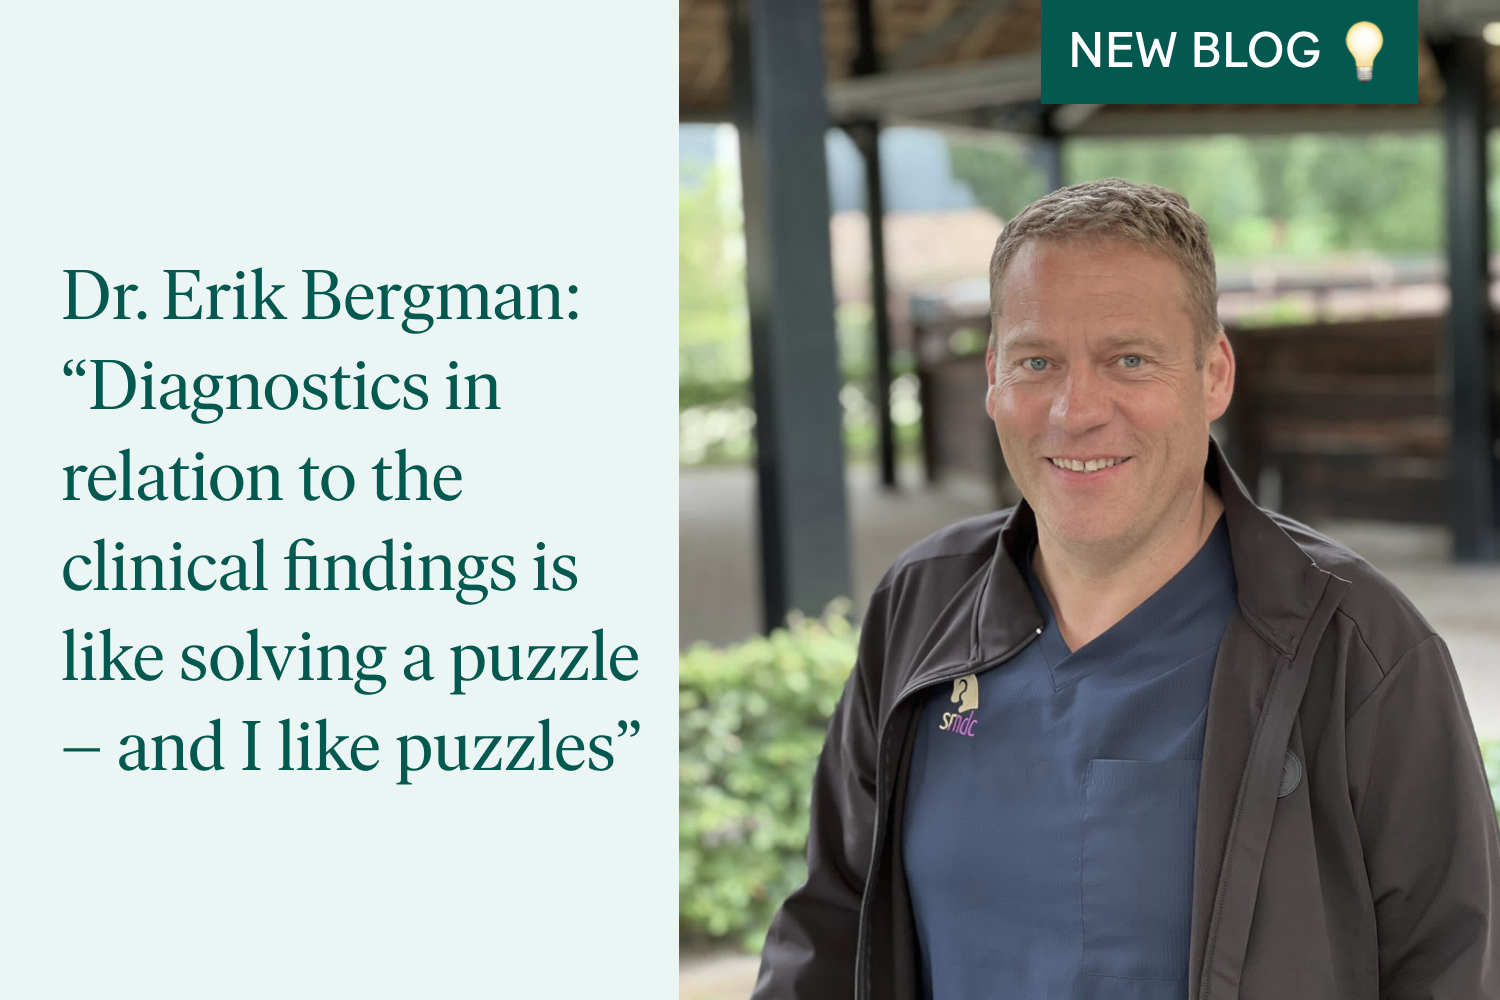 Dr. Erik Bergman: “Diagnostics in relation to the clinical findings is like solving a puzzle – and I like puzzles”